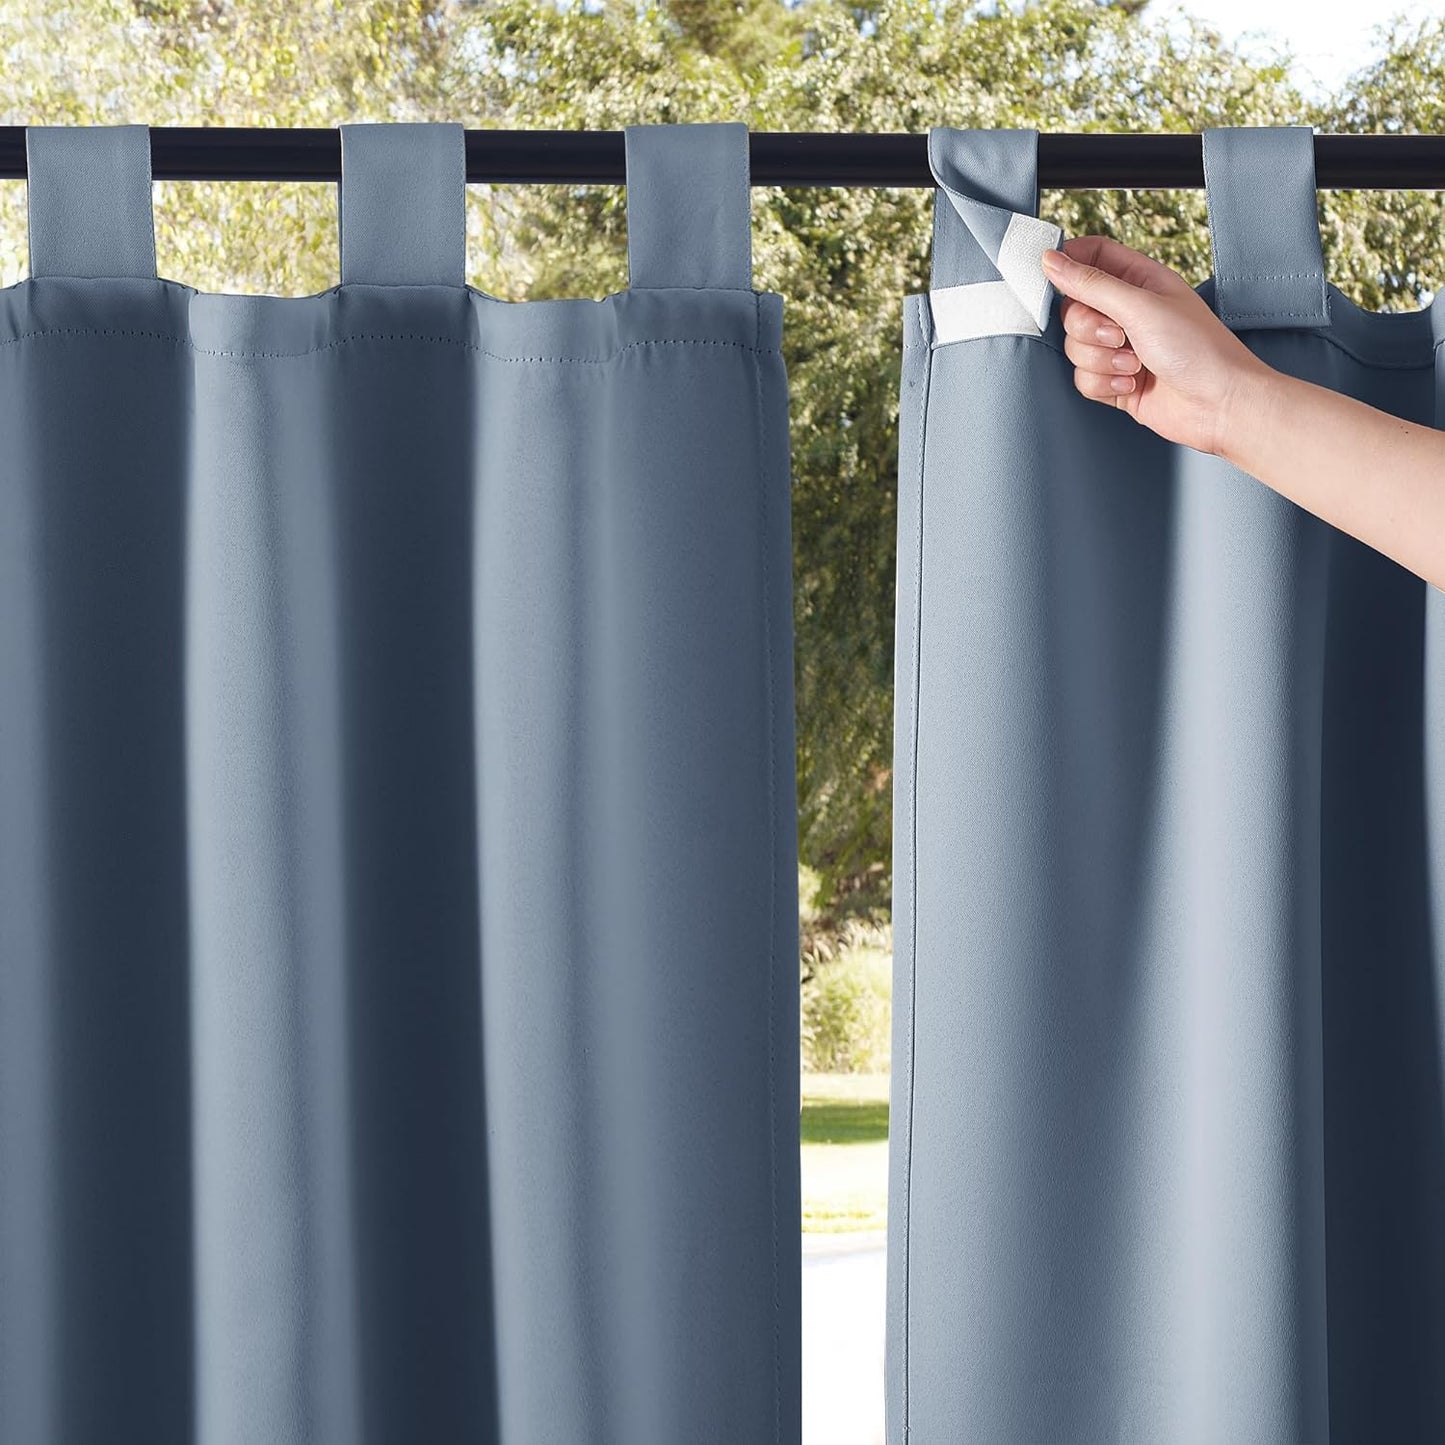 NICETOWN 2 Panels Outdoor Patio Curtainss Waterproof Room Darkening Drapes, Detachable Sticky Tab Top Thermal Insulated Privacy Outdoor Dividers for Porch/Doorway, Biscotti Beige, W52 X L84  NICETOWN Stone Blue W52 X L108 